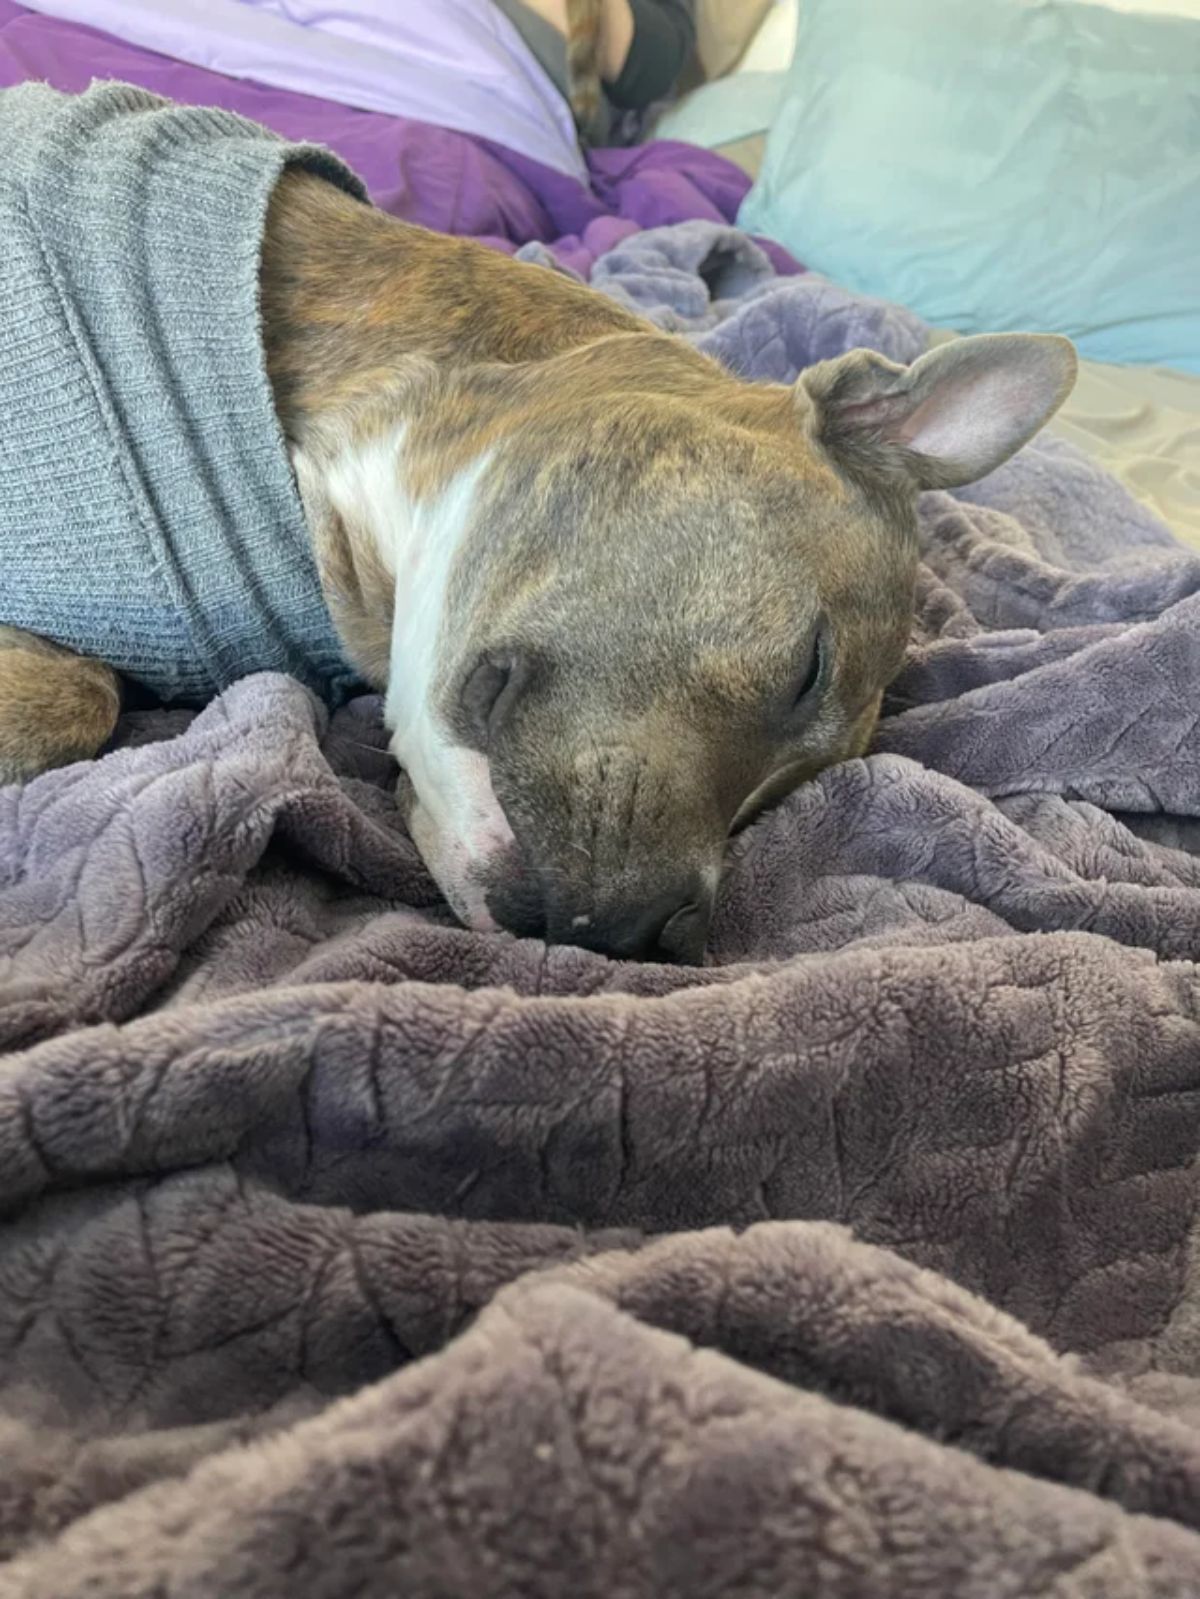 brown black and white dog wearing a blue sweater and sleeping on a bunch of blankets on a bed